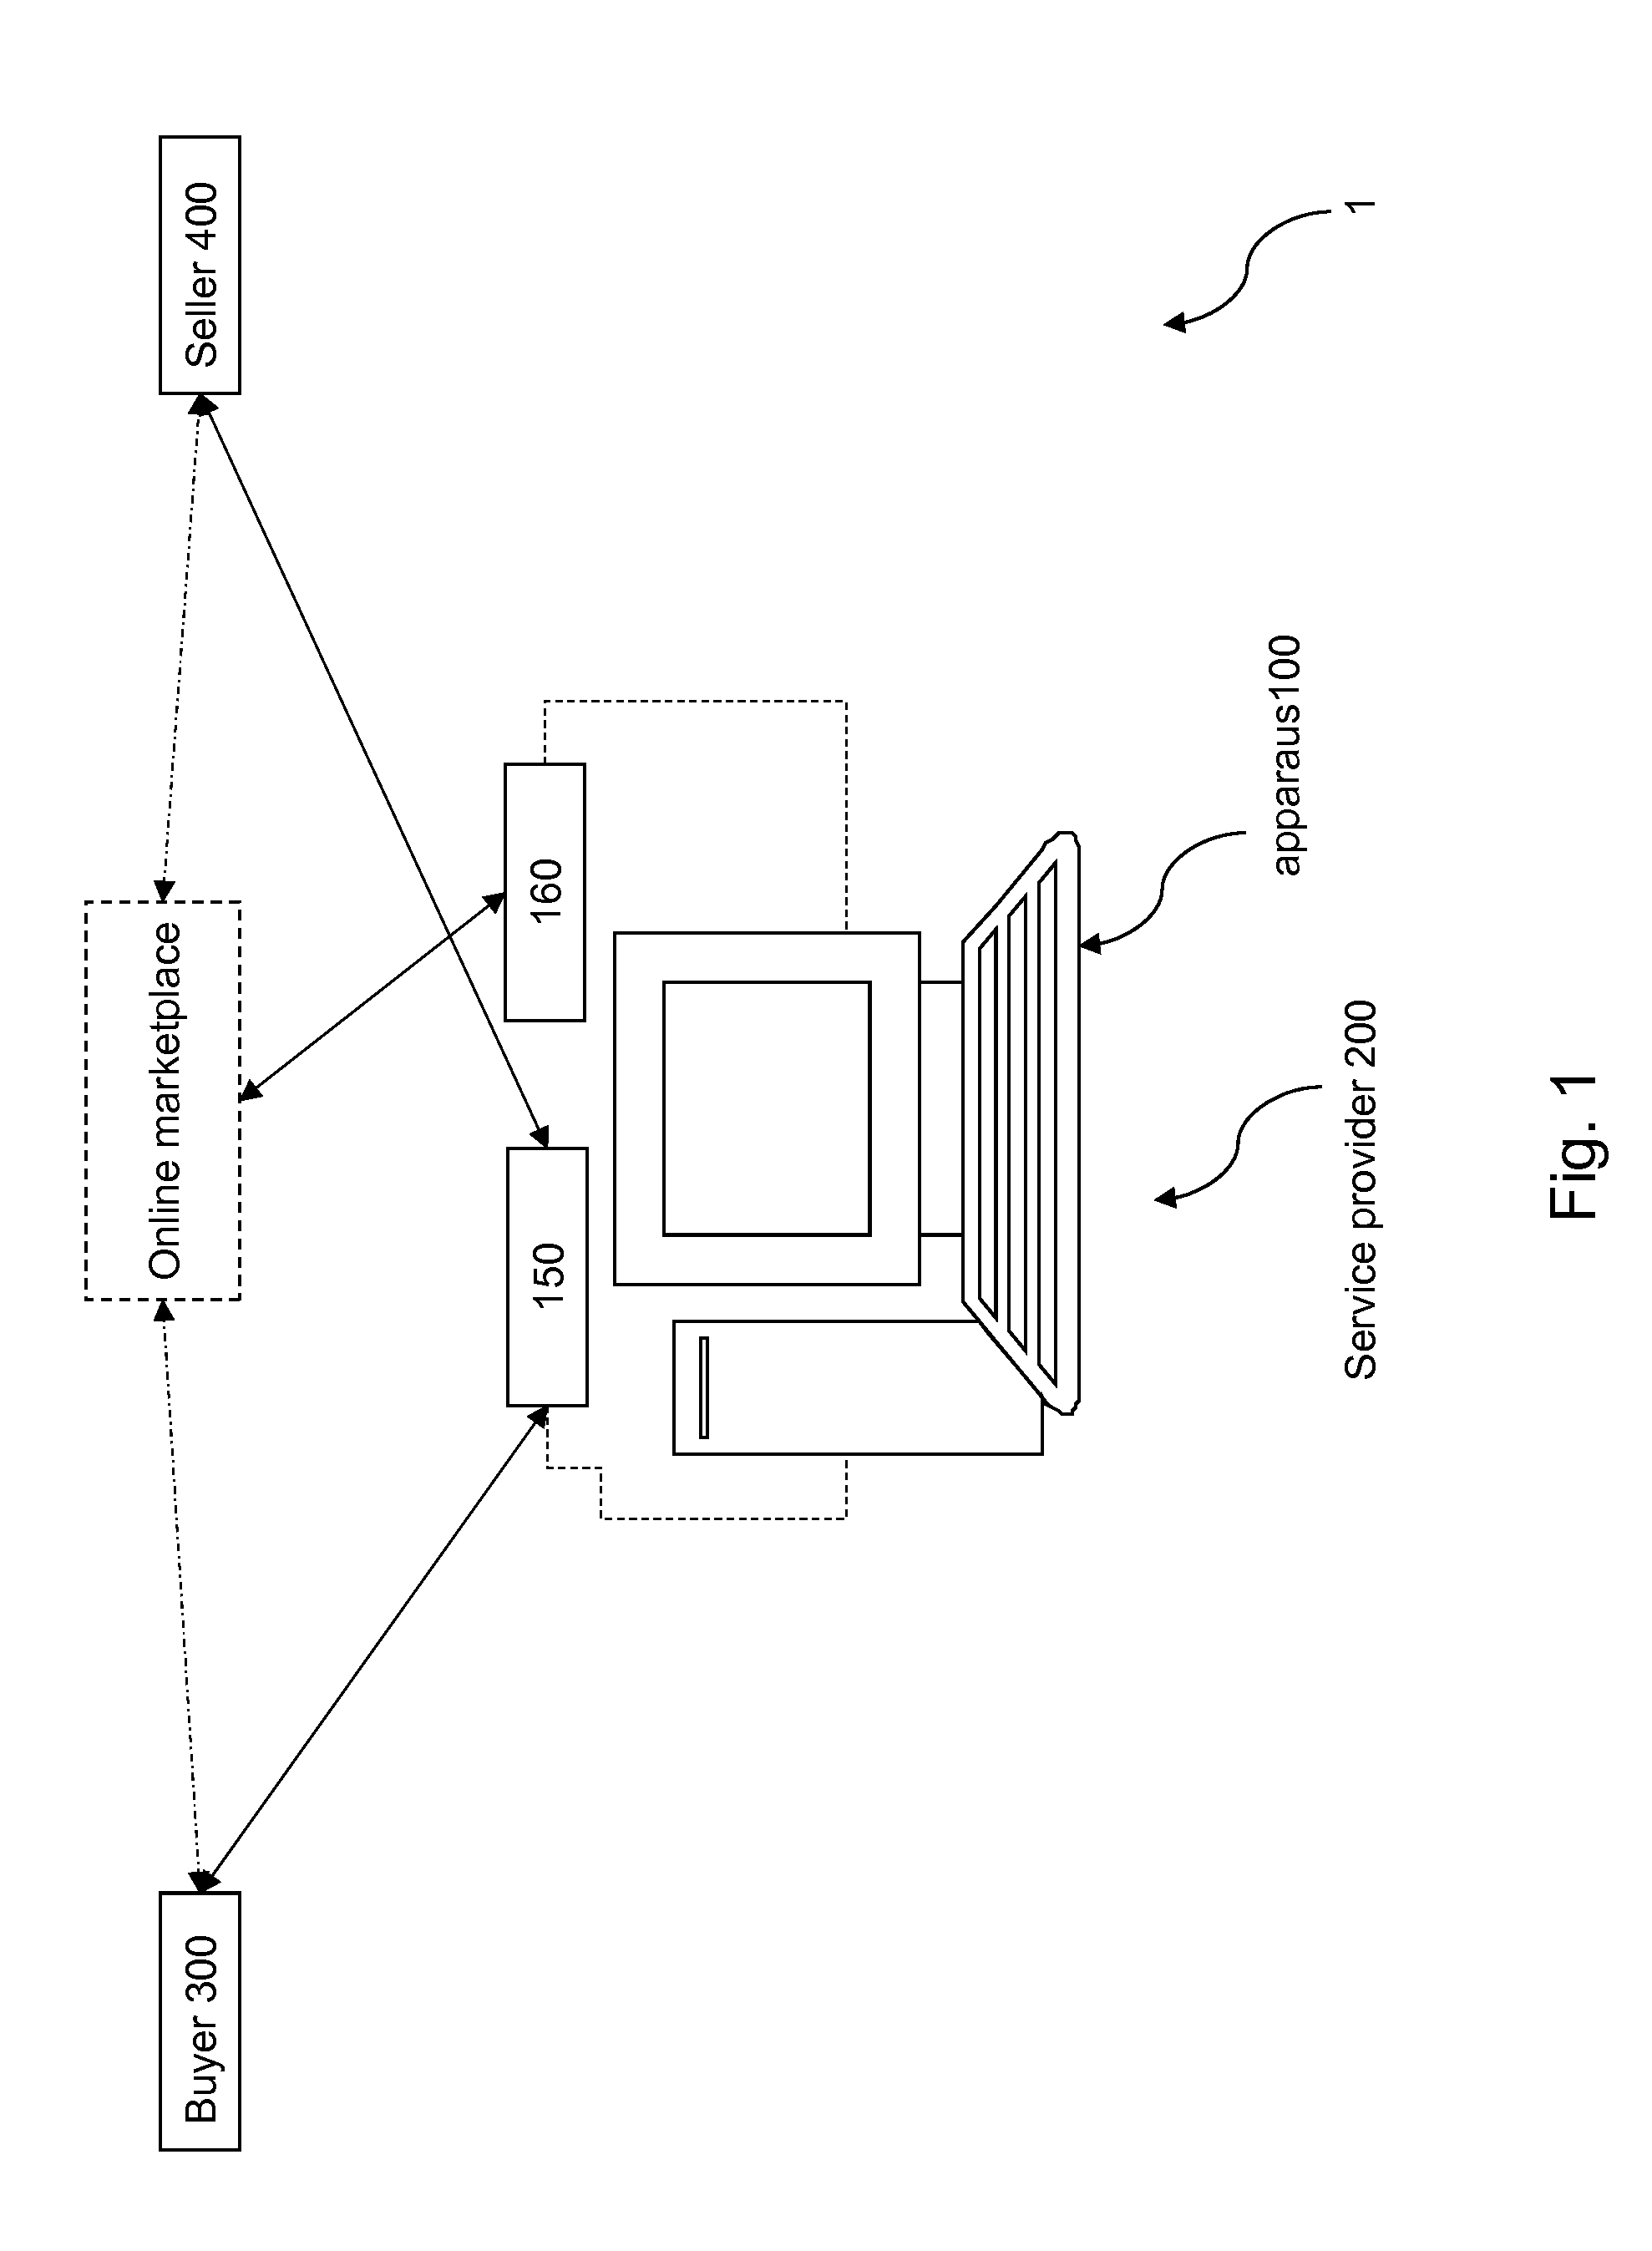 Method and apparatus for matching buyers with sellers in a marketplace to facilitate trade